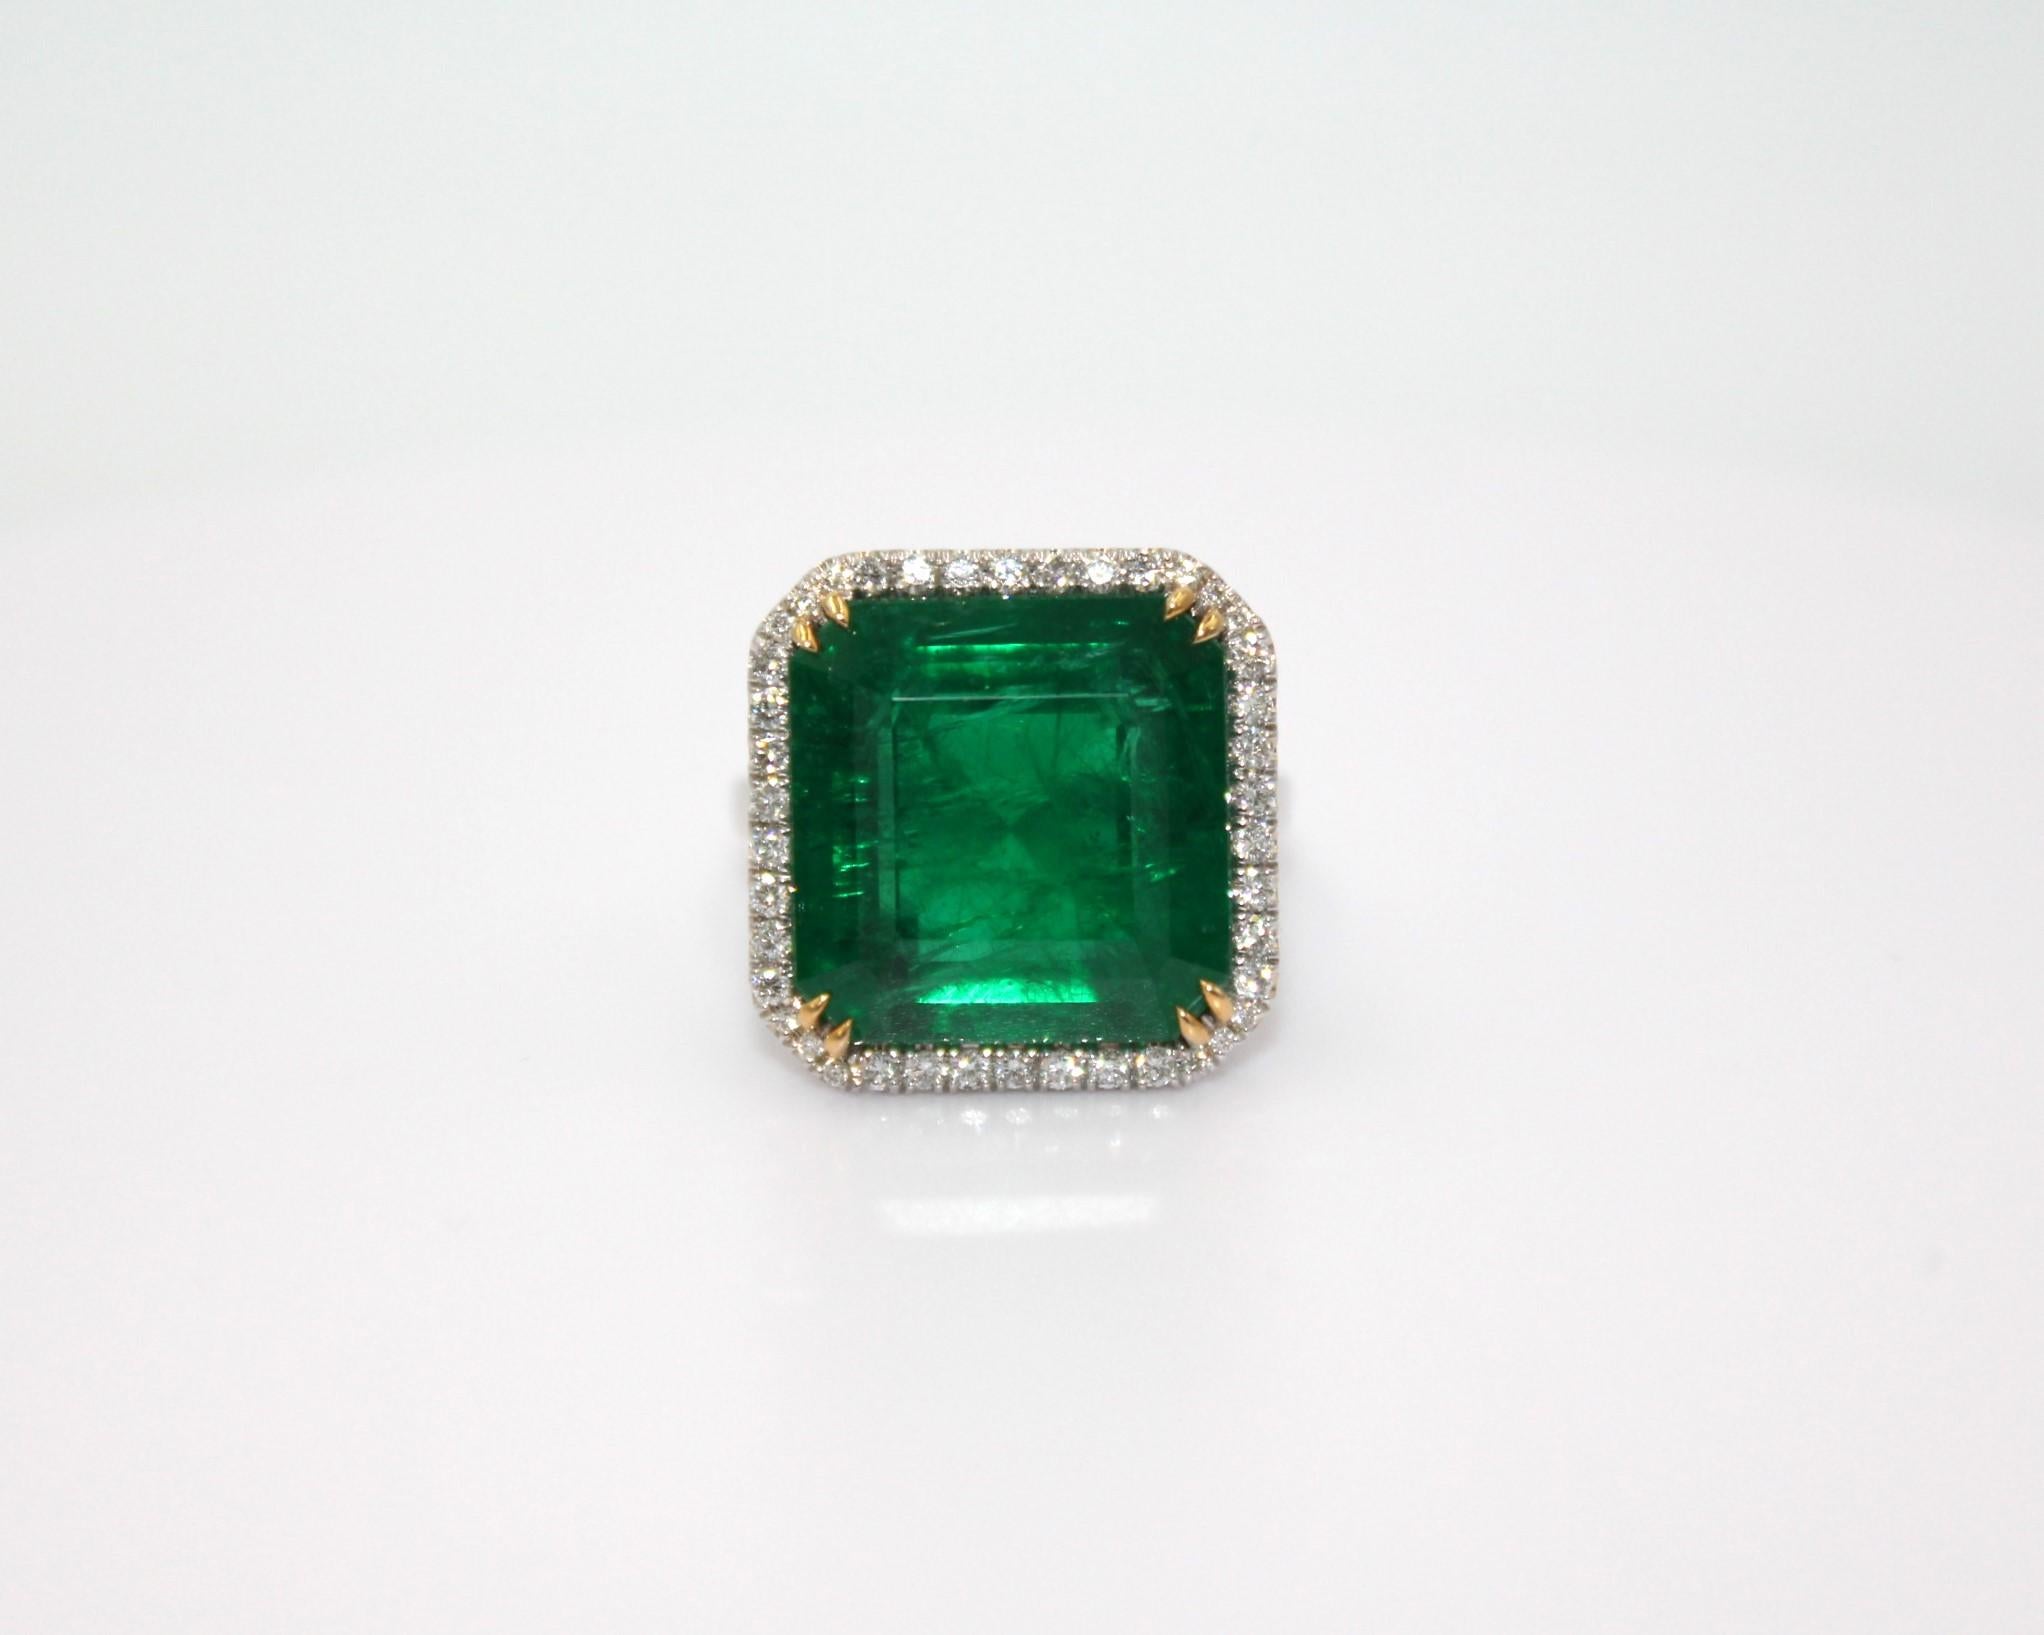 15.61 carats emerald-cut Zambian Emerald framed with 40 round shaped diamonds, totaling diamond weight of 0.55 carat. 

This gorgeous Emerald Diamond Ring will highlight your elegance and uniqueness. 

Item Details:
- Type: Ring
- Metal: 18K 
-